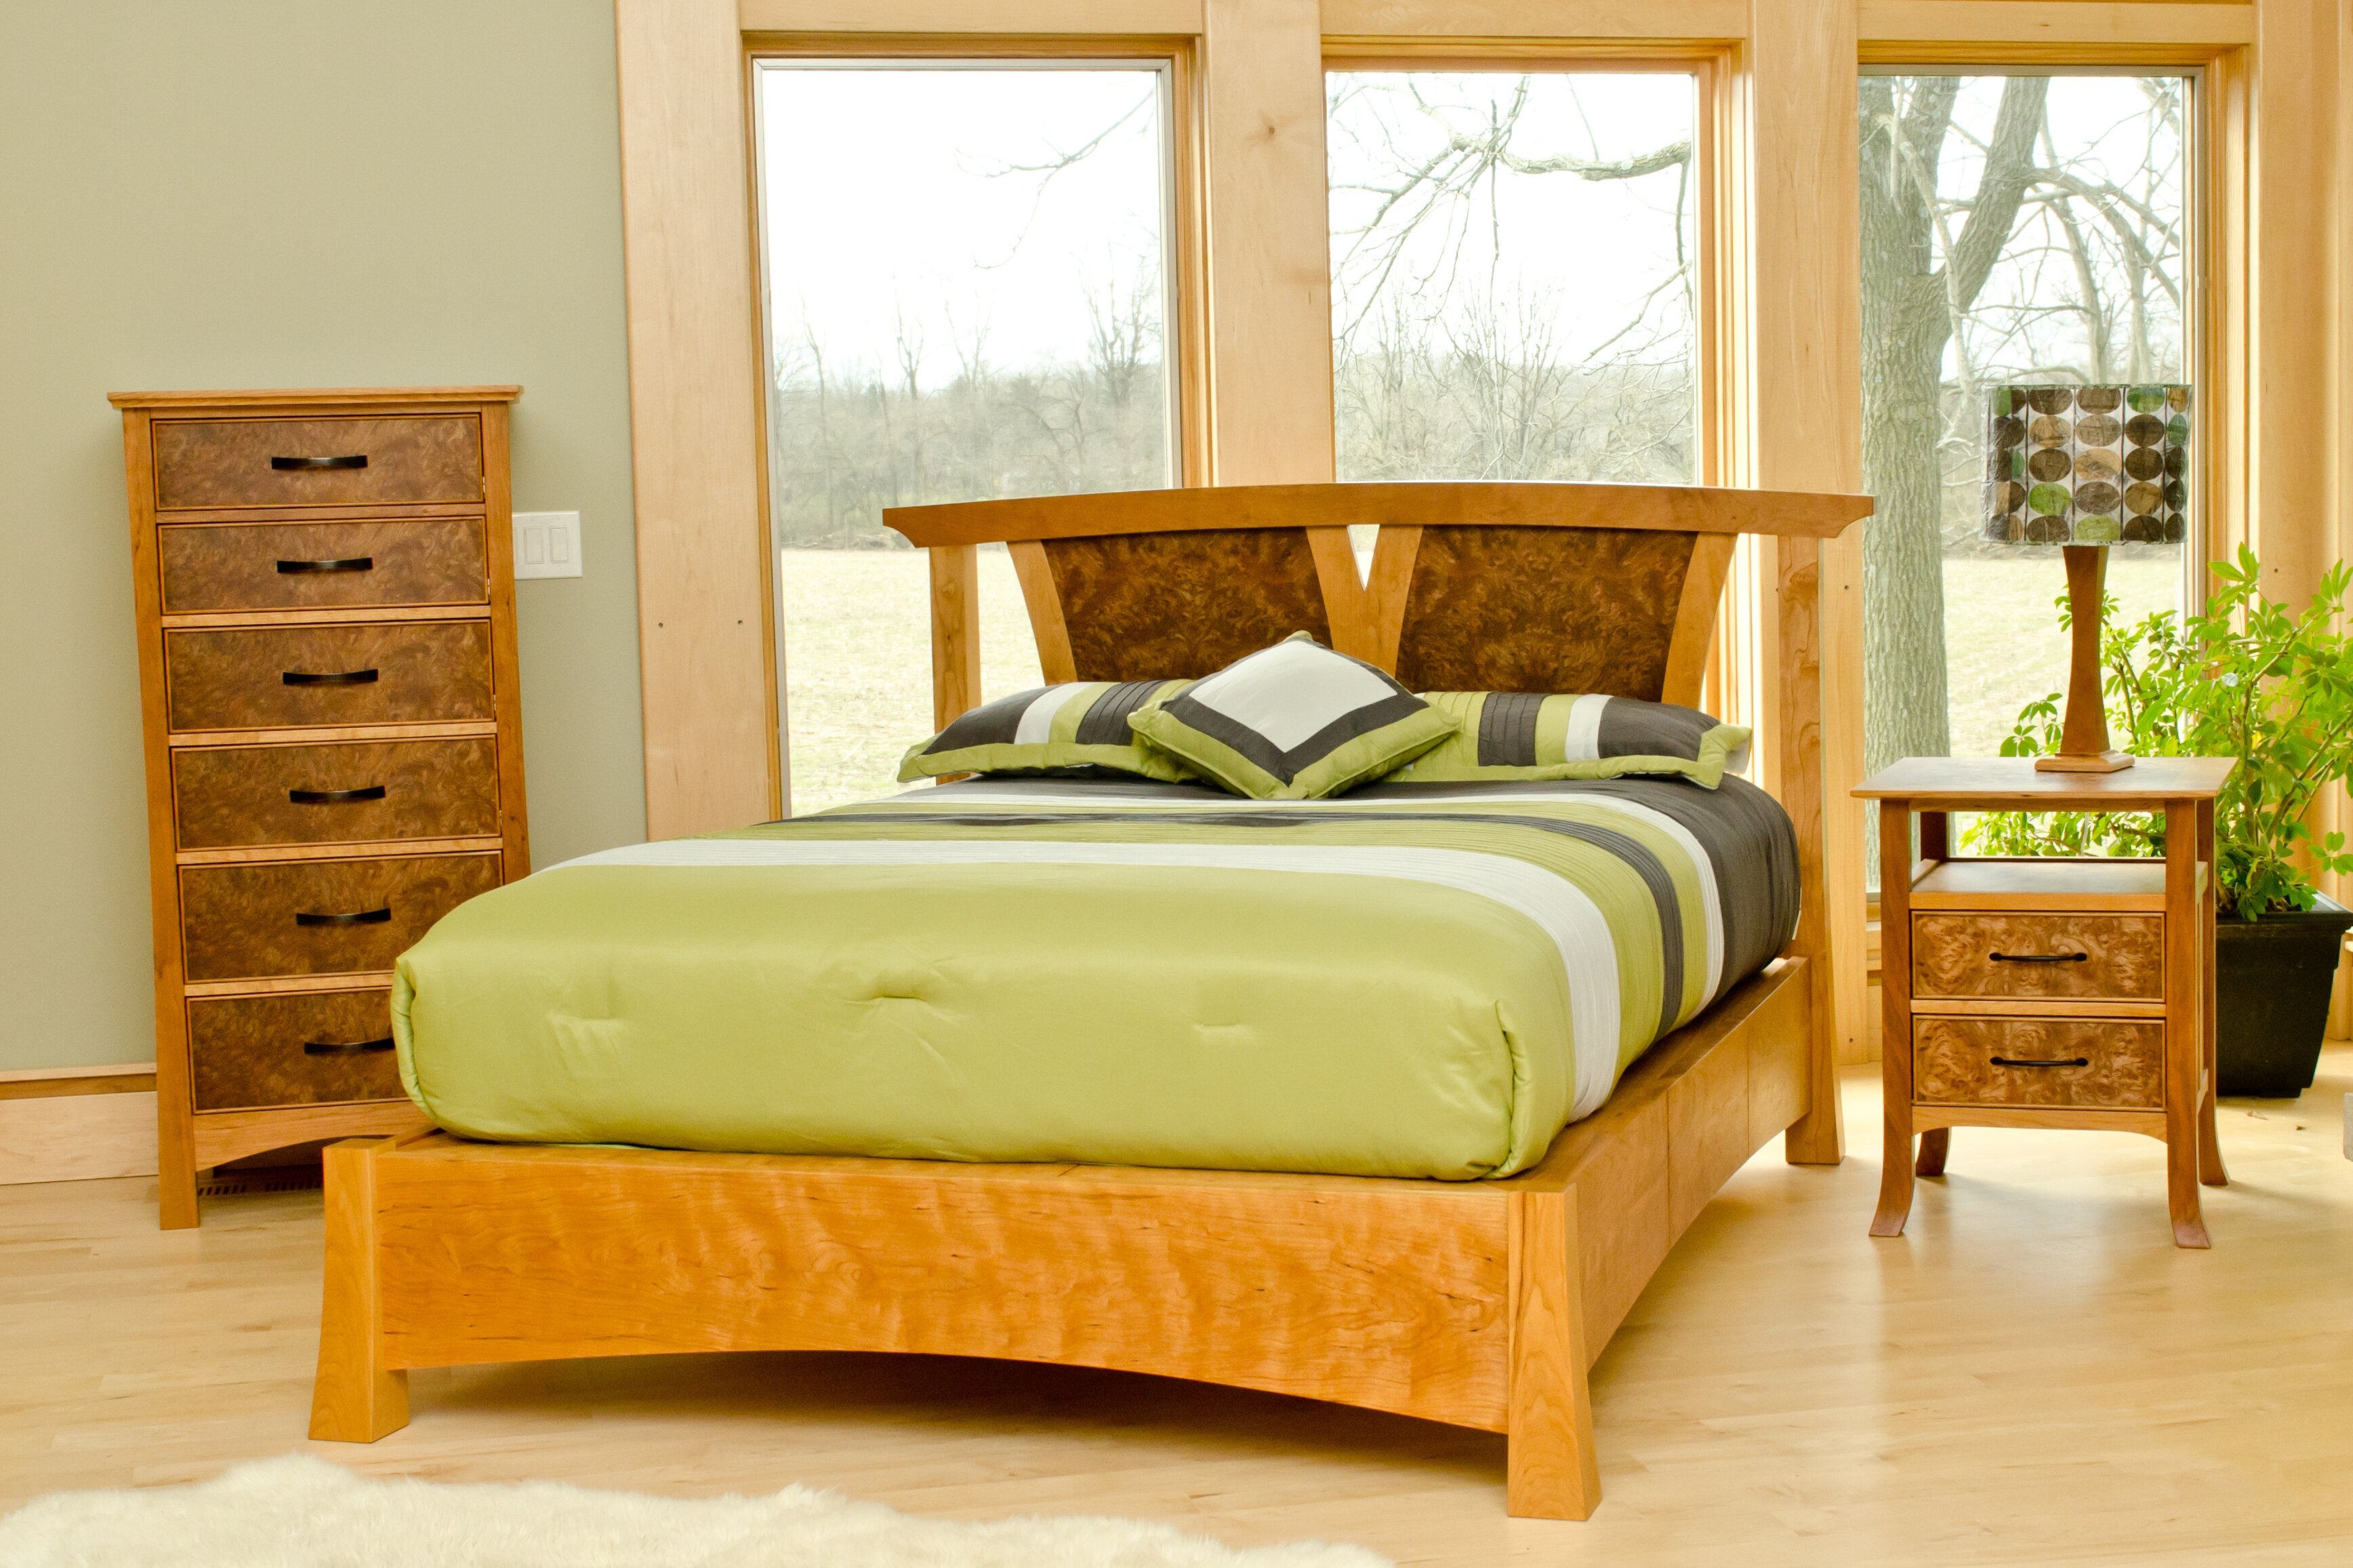 This bedroom set is one of the many custom designs from Keener & Schultz Fine Woodworks.